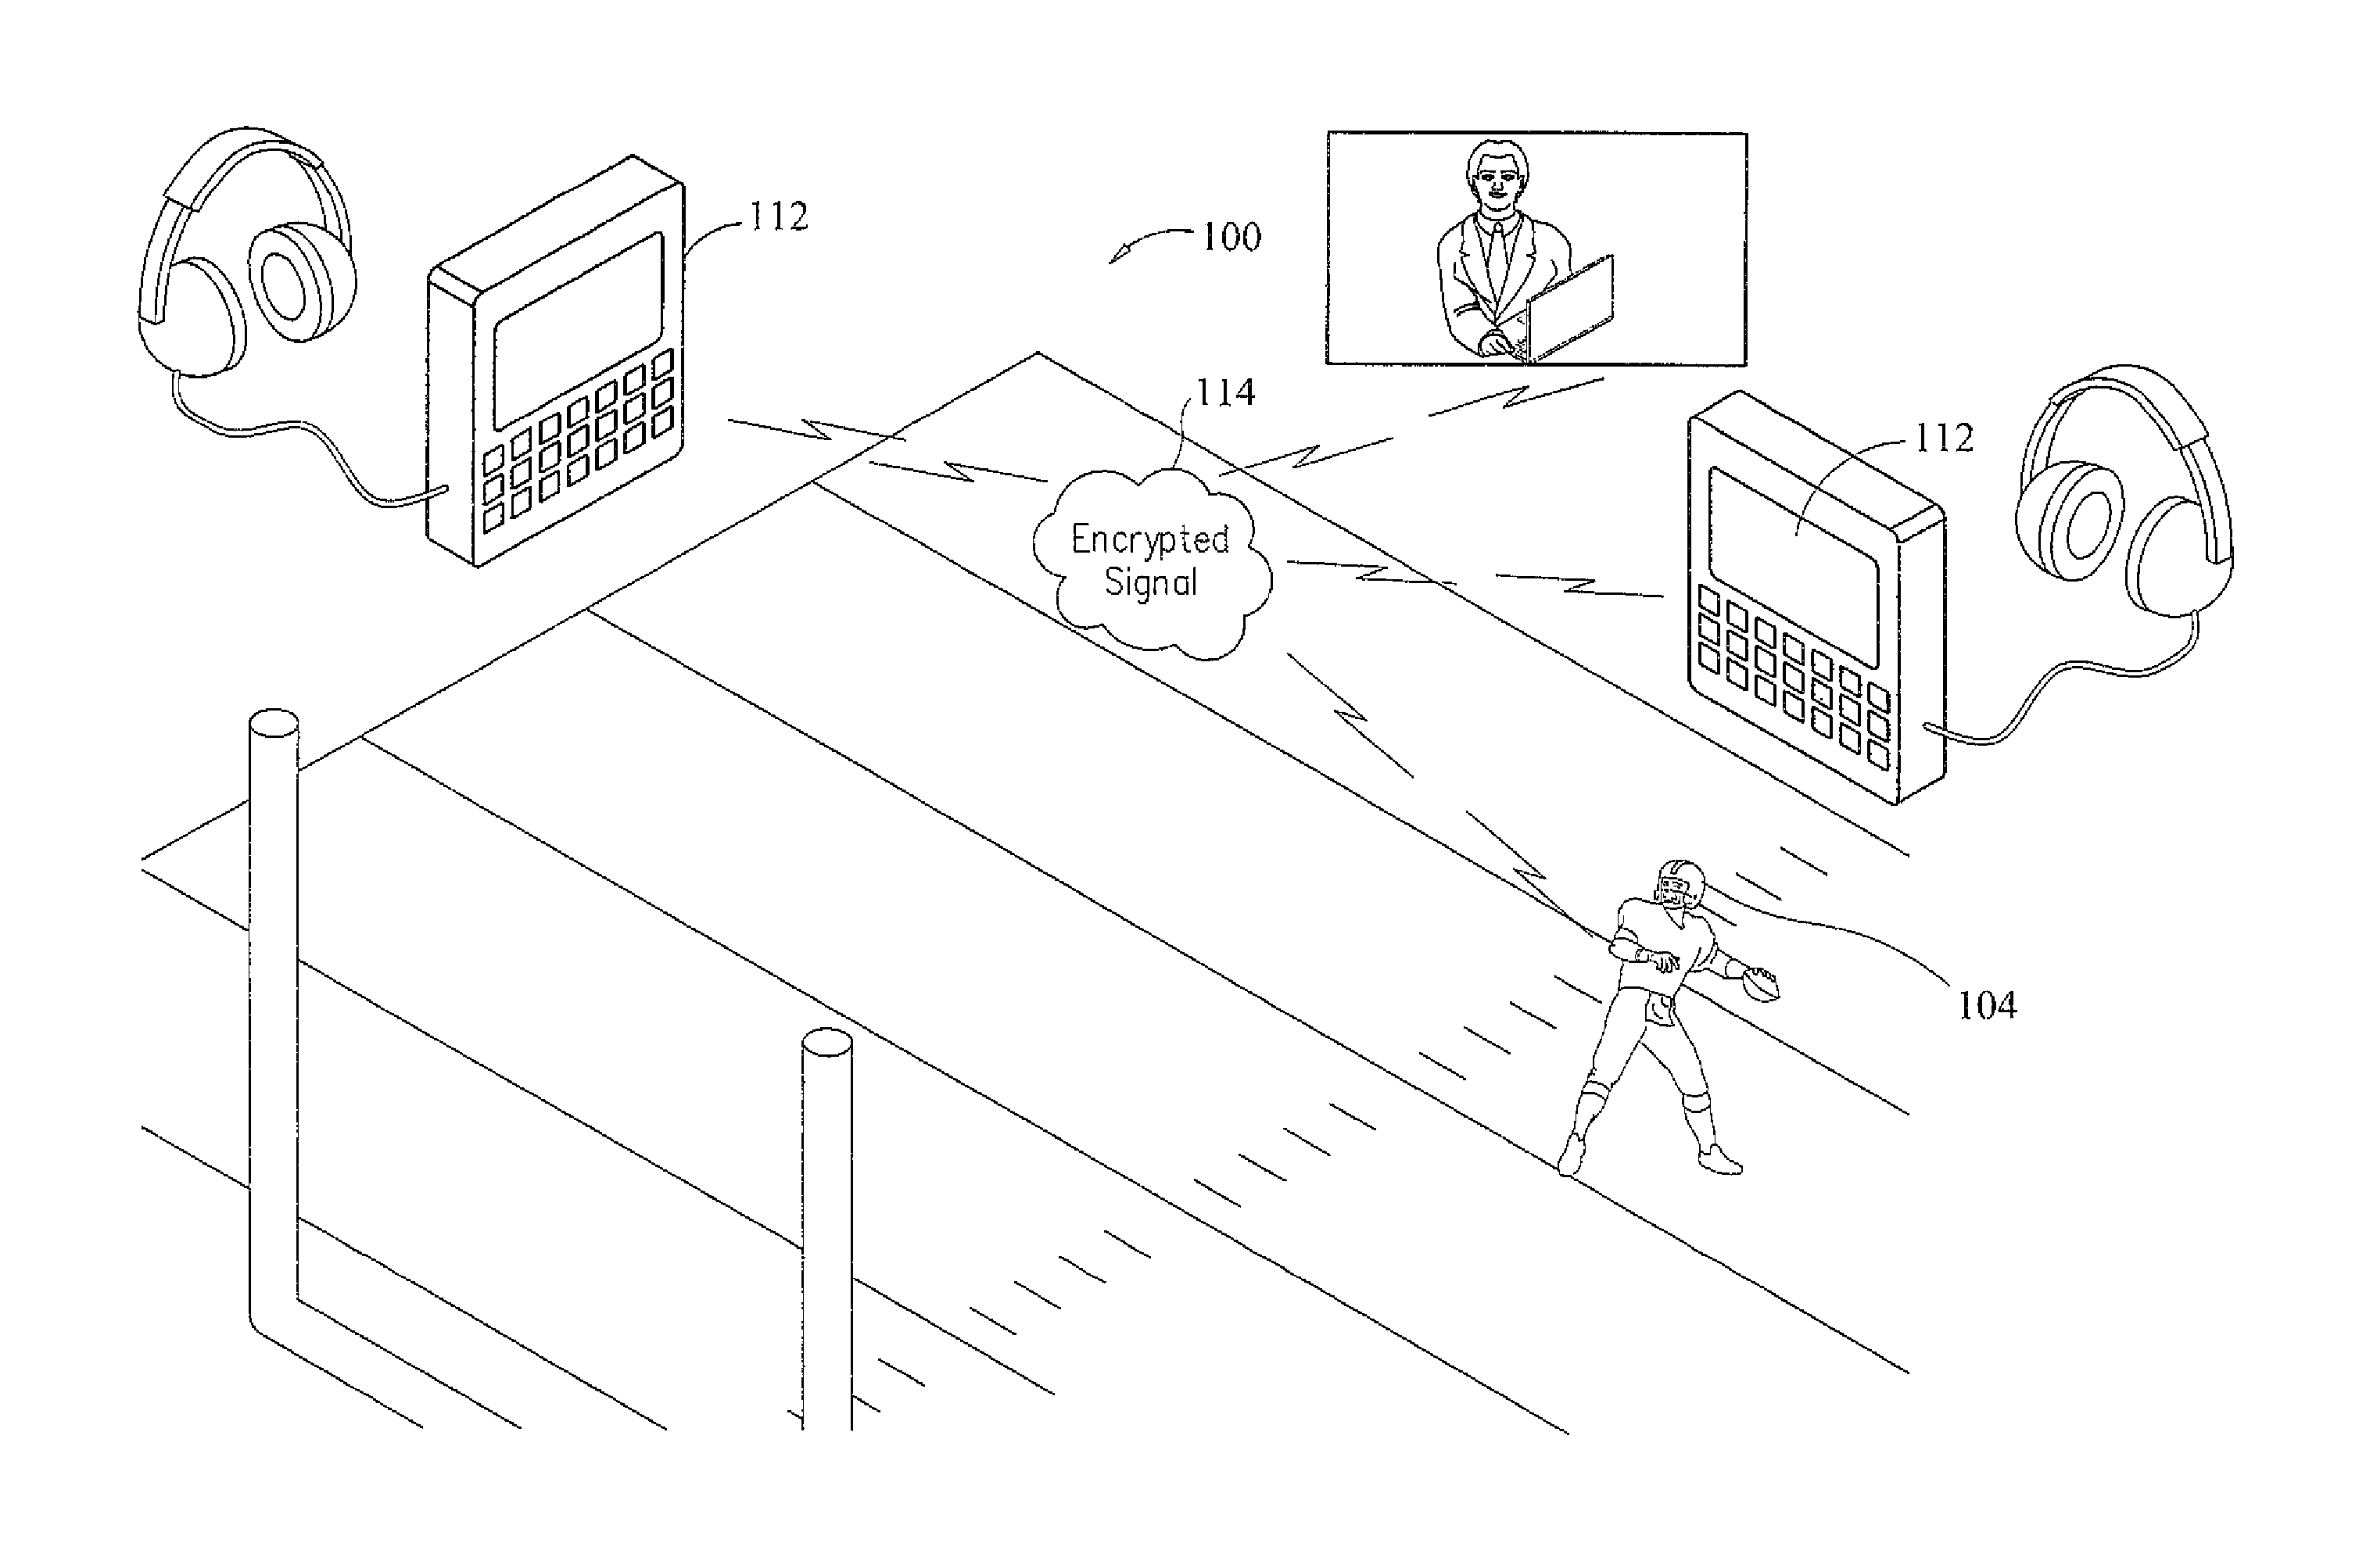 System and method of distributing game play instructions to players during a game